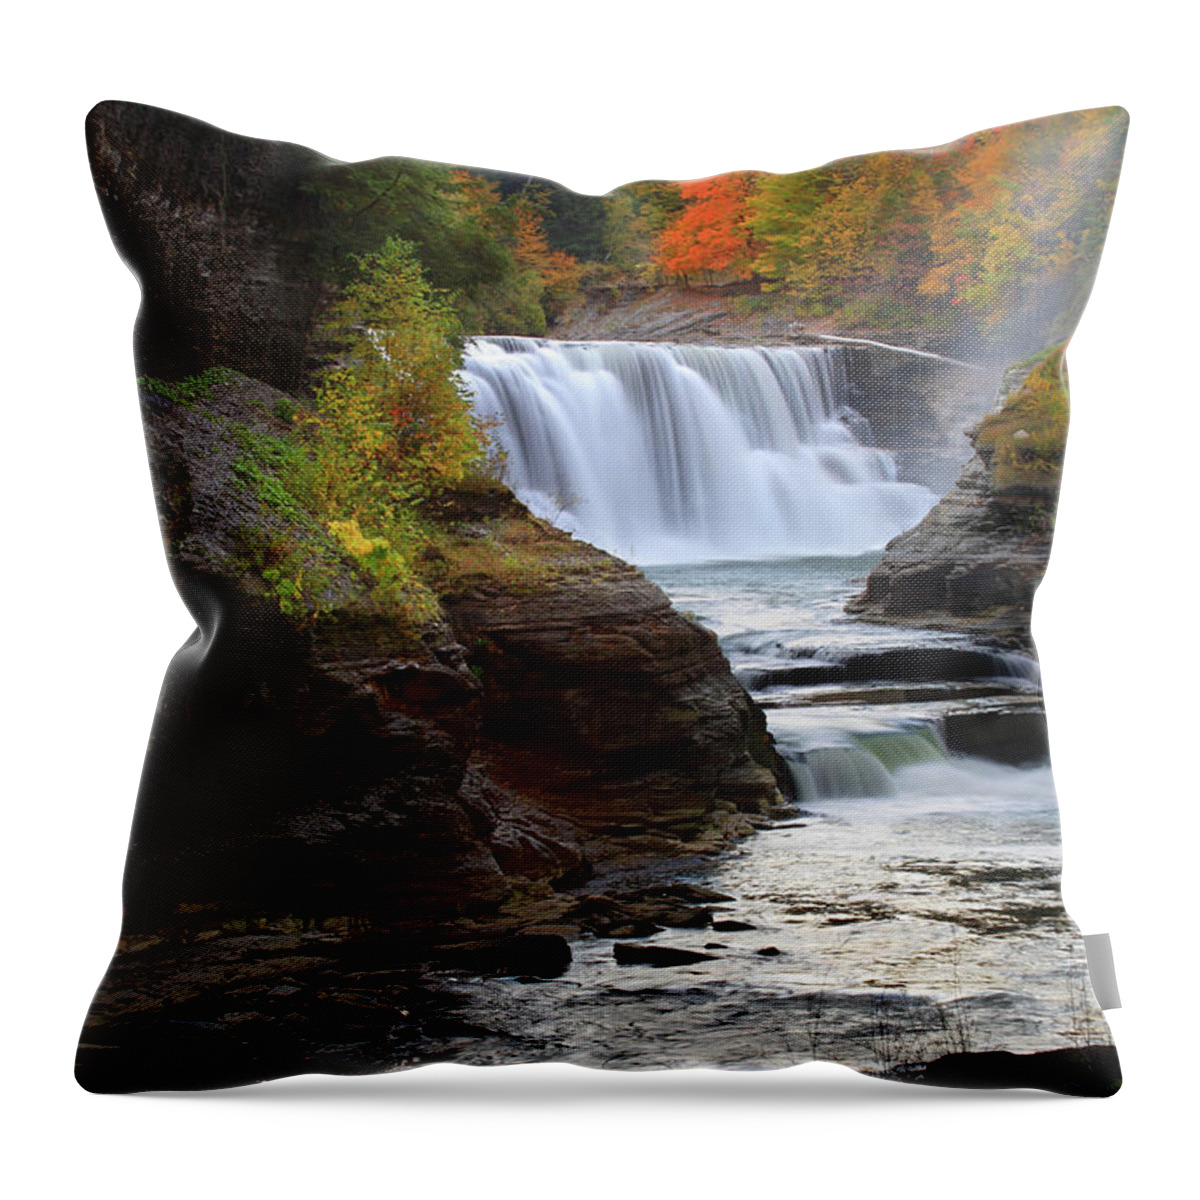 Tranquility Throw Pillow featuring the photograph Lower Falls Of The Genesse River by Image Courtesy Of Jeffrey D. Walters